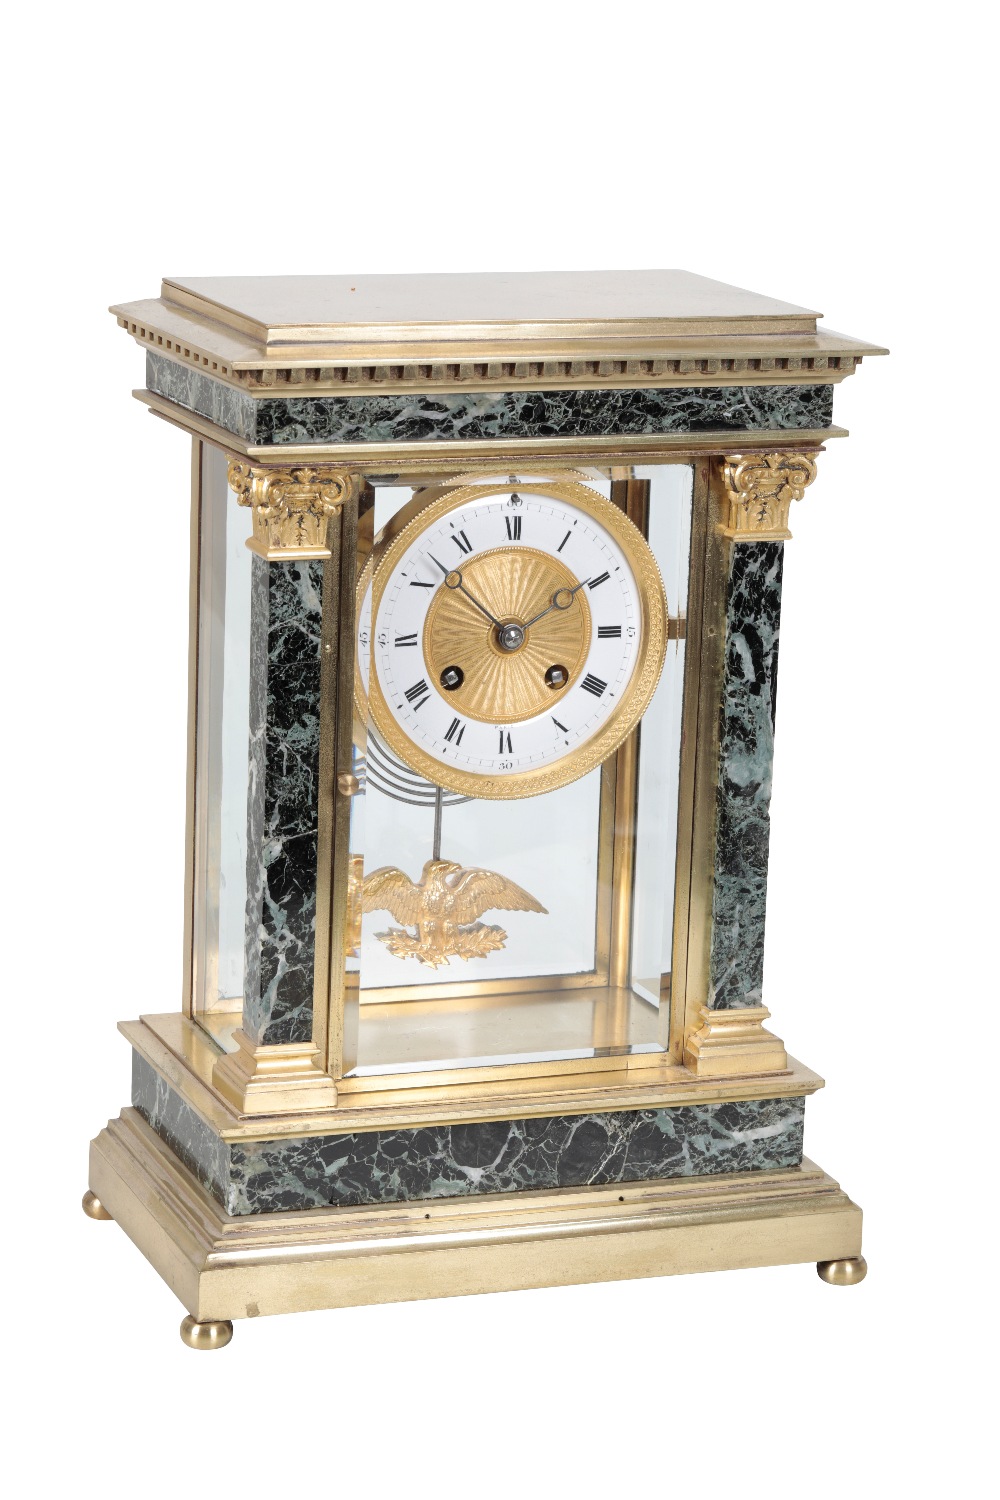 A VICTORIAN FOUR GLASS, GILT BRONZE AND ITALIAN SERPENTINE MARBLE MOUNTED MANTEL CLOCK, - Image 2 of 2